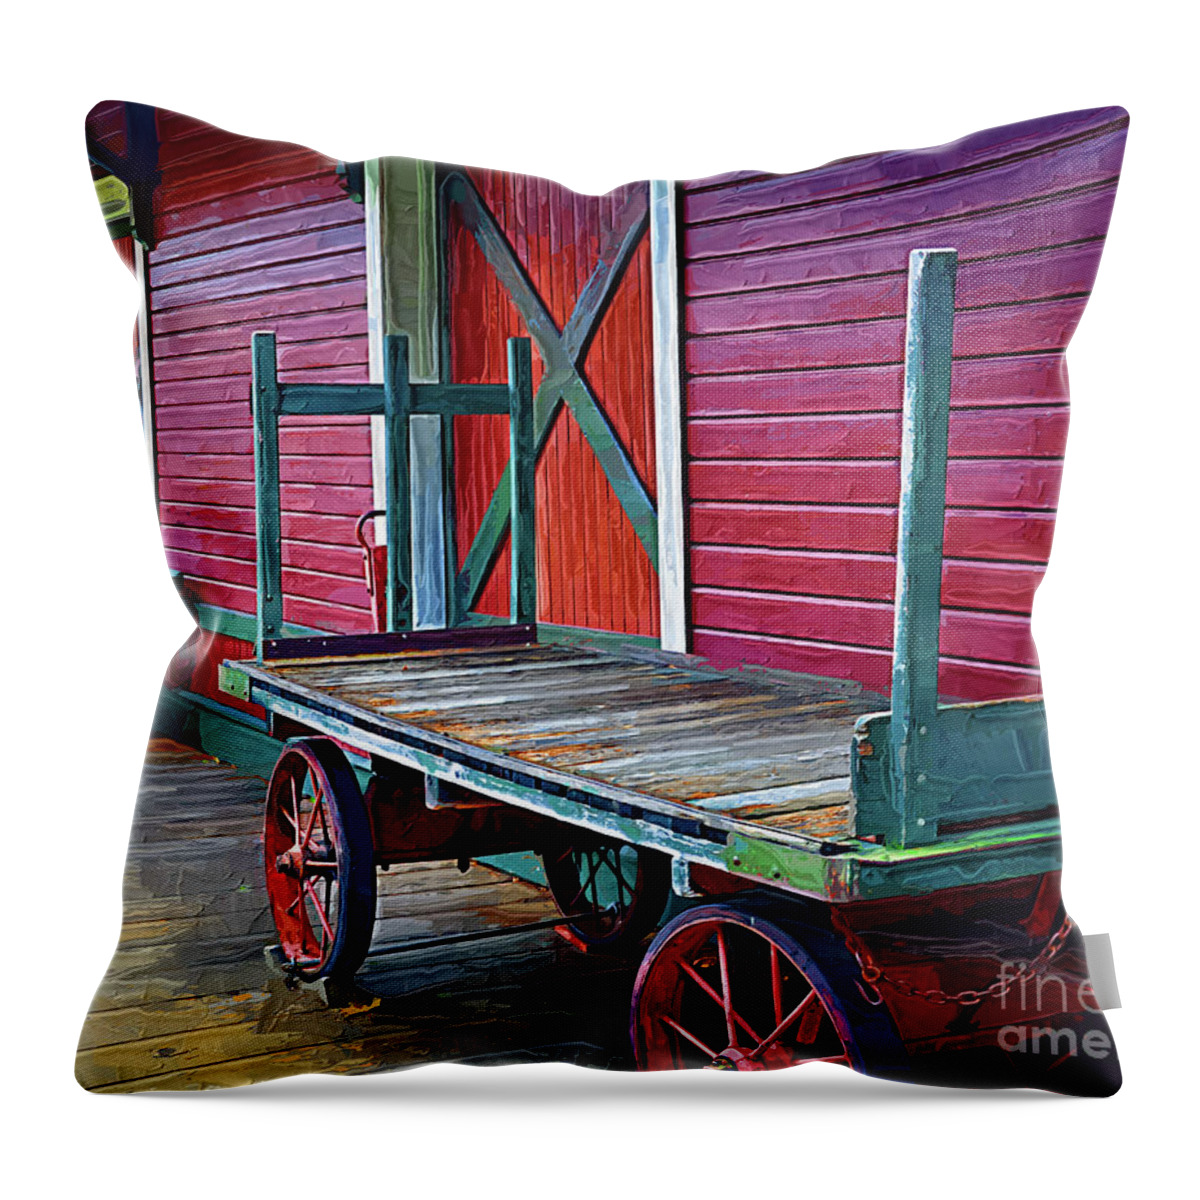 Railroad-station Throw Pillow featuring the digital art Train Carts by Kirt Tisdale